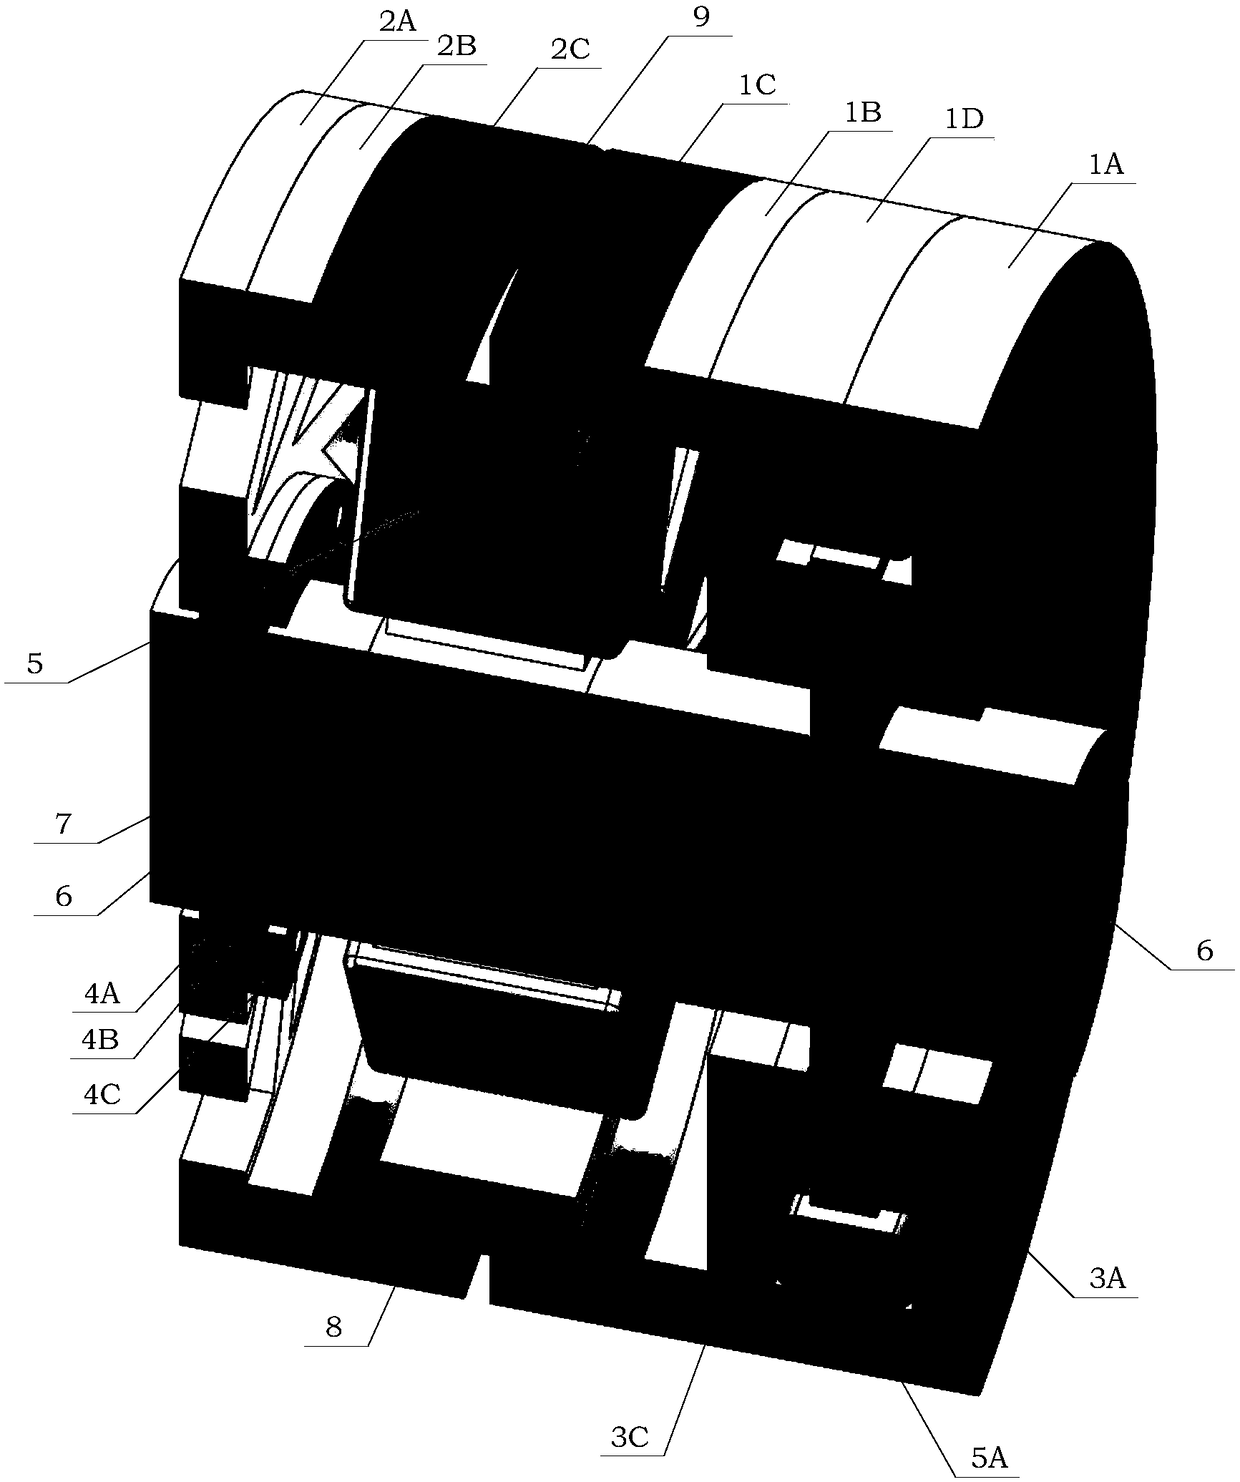 Orthogonal magnetic circuit radial-axial-integrated magnetic bearing based on symmetrical self-lubricating flexible backup bearing structure